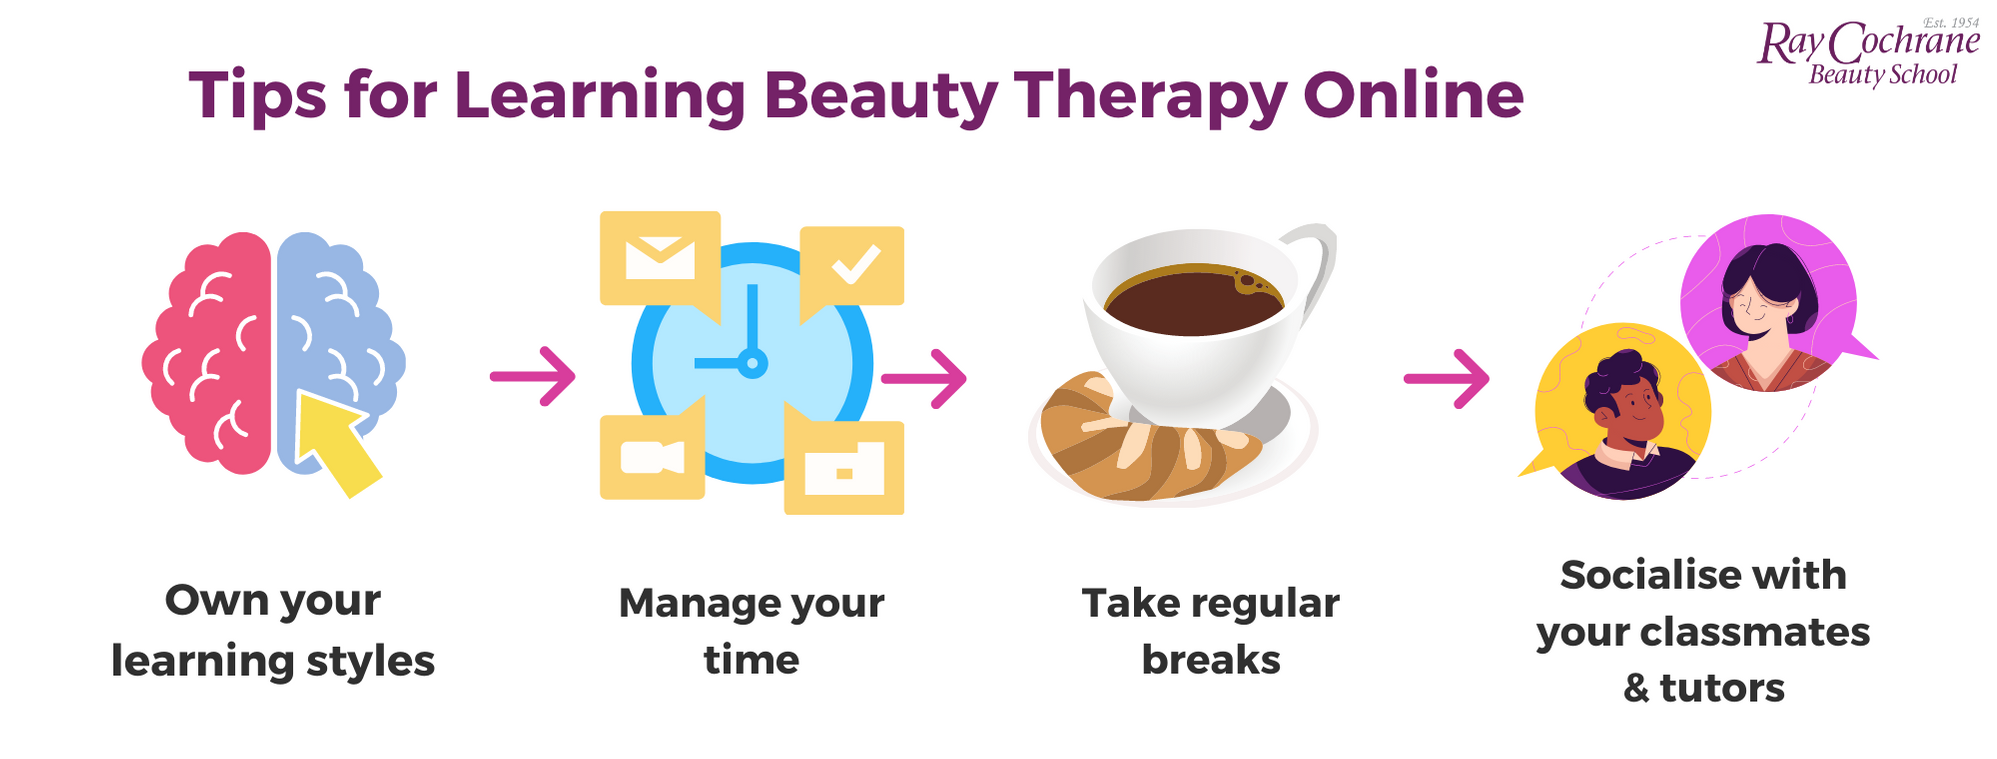 tips for learning beauty therapy online